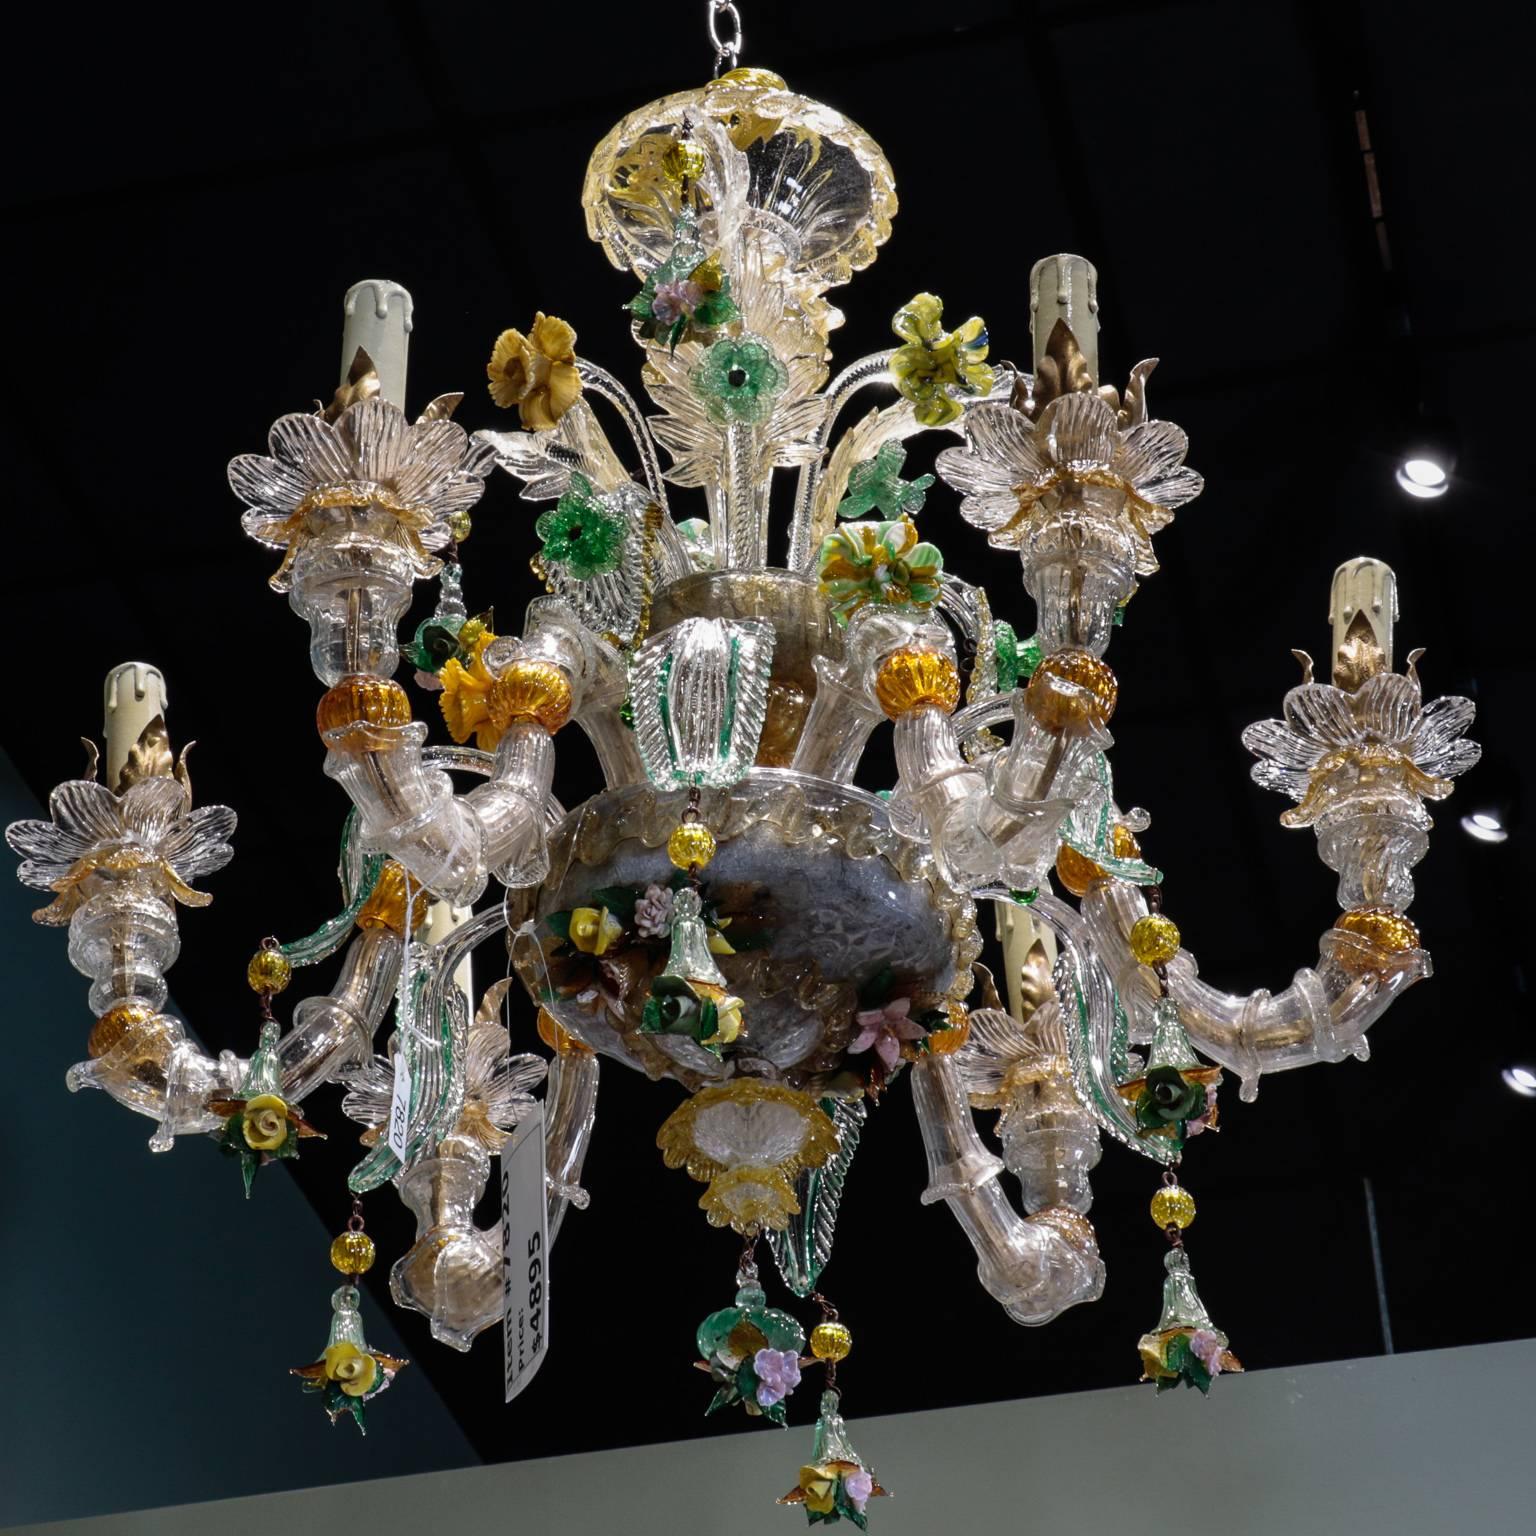 Circa 1880s Venetian chandelier features clear hand blown glass foundation with gilt metal bobeches, multicolor and gold dust glass accents. Large glass blown leaves and colored glass flowers along decorate the six light chandelier along with